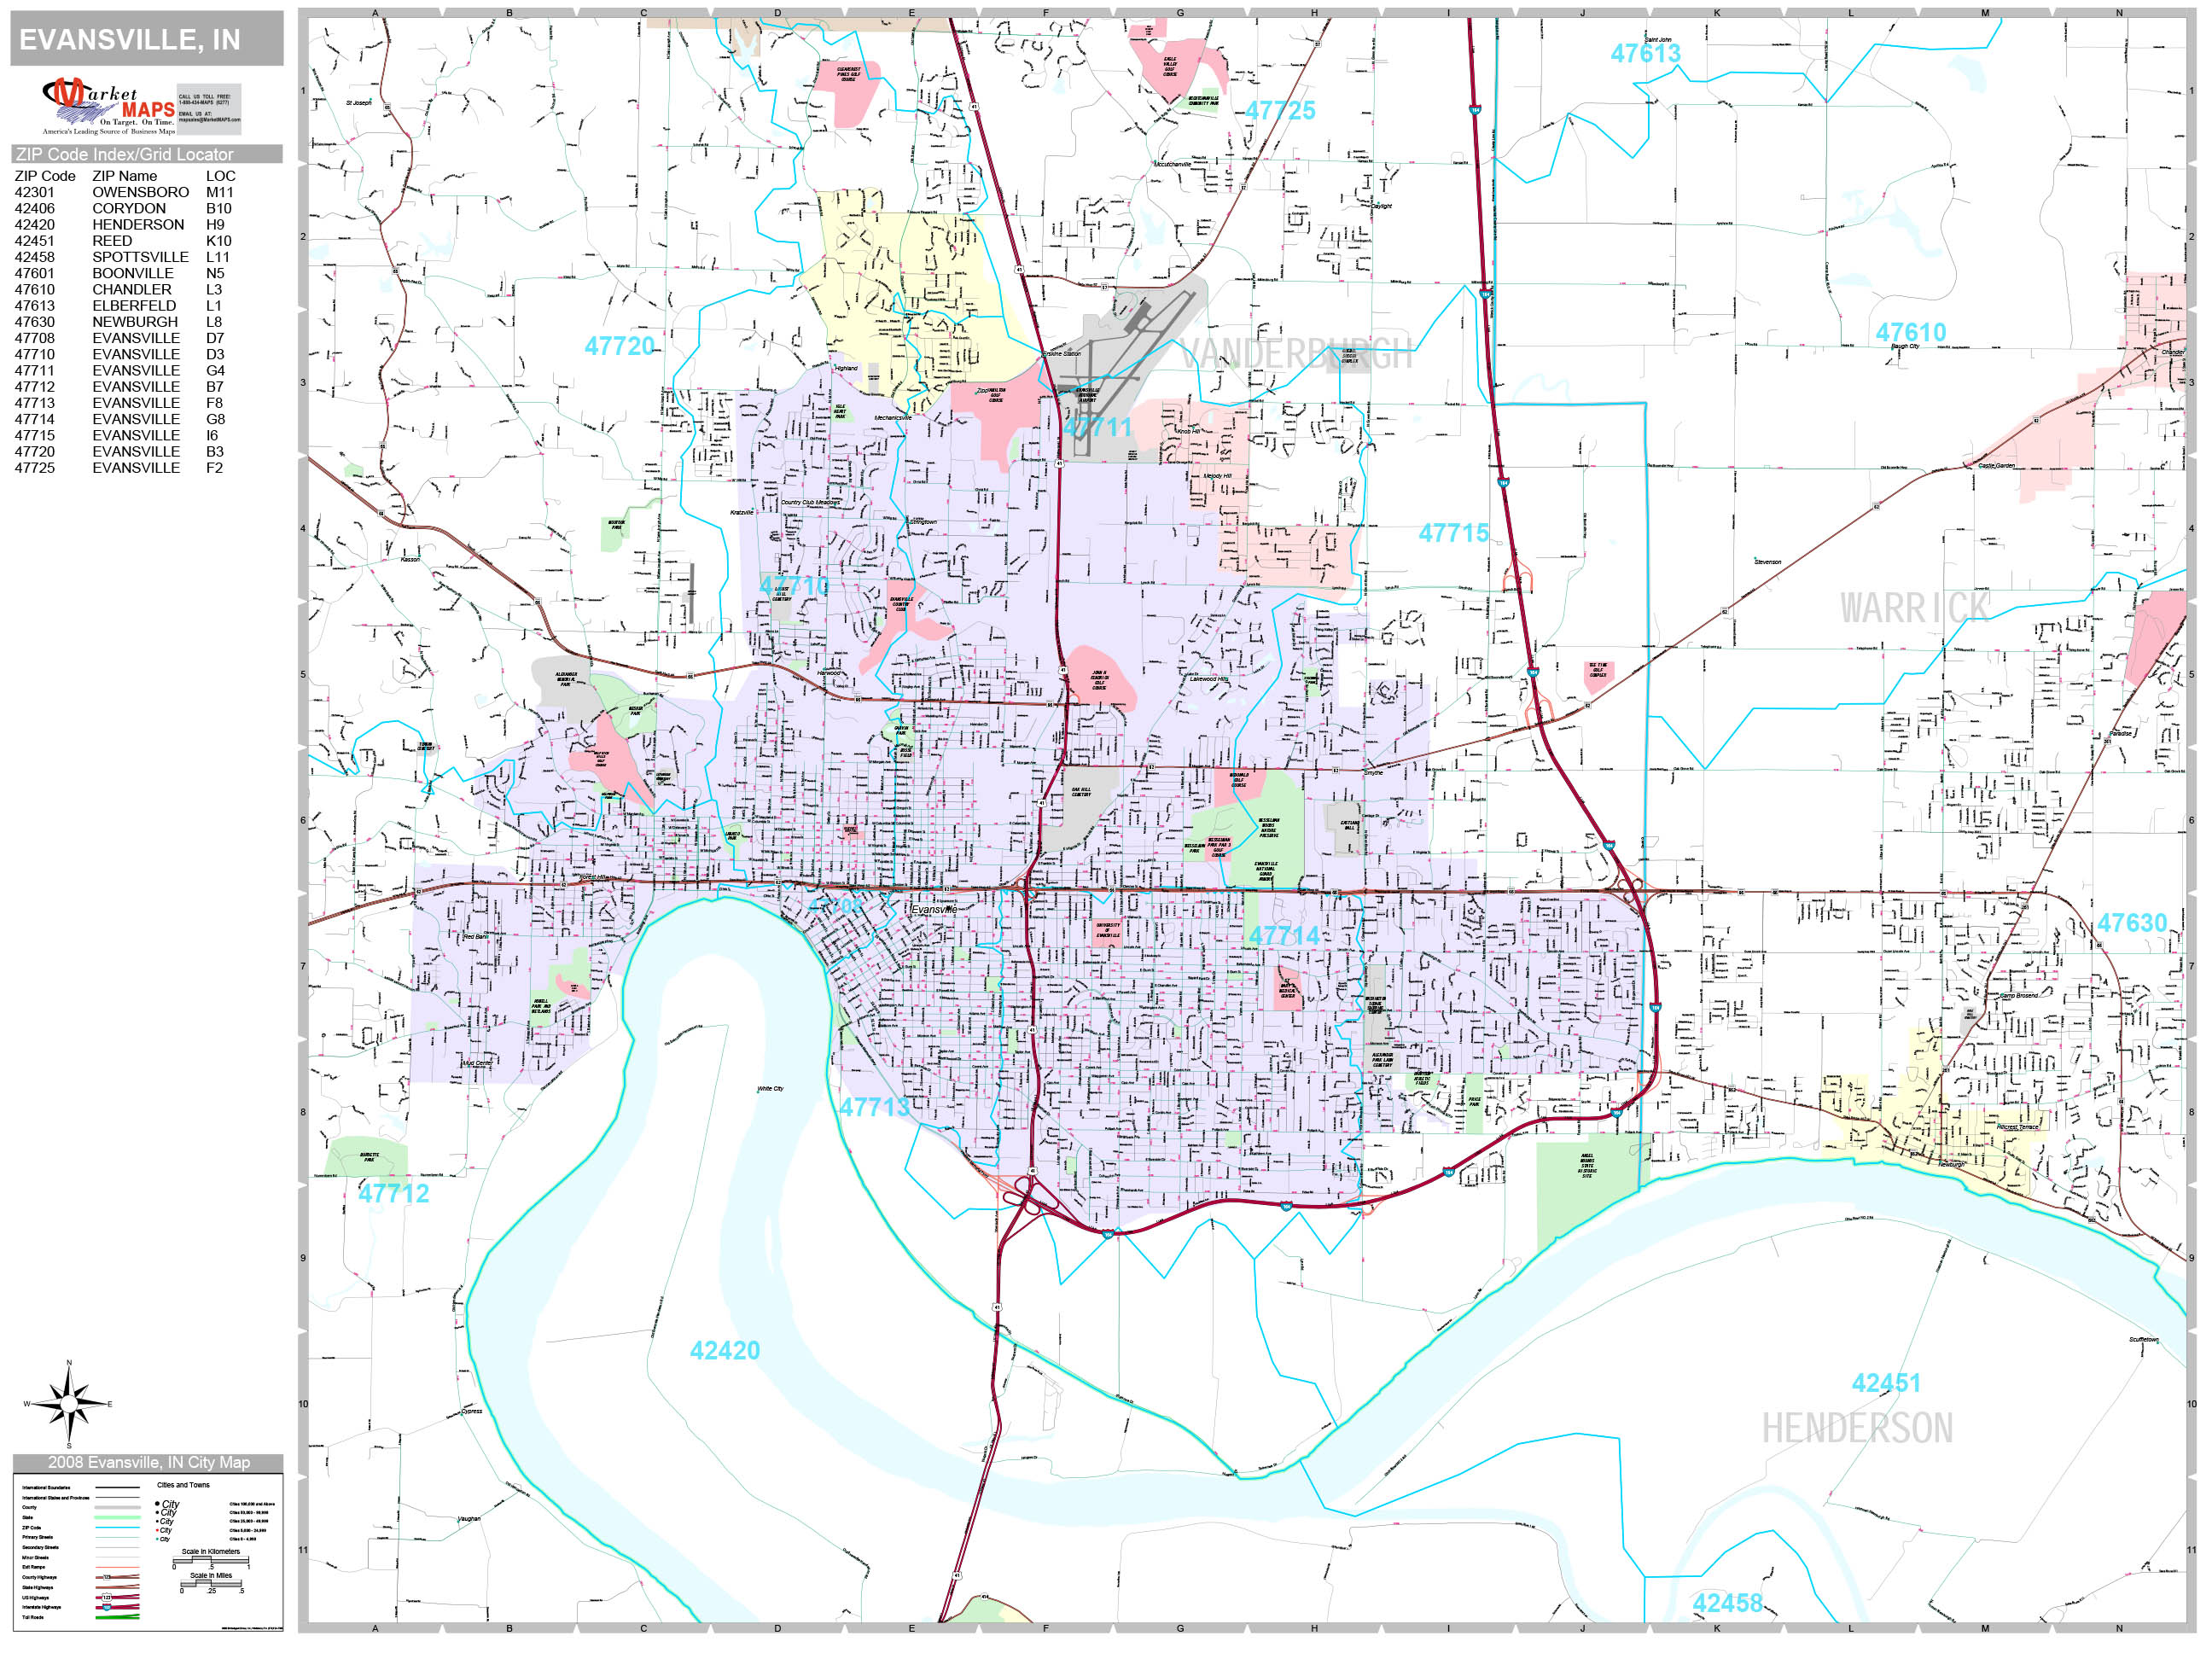 Evansville Indiana Wall Map (Premium Style) by MarketMAPS - MapSales